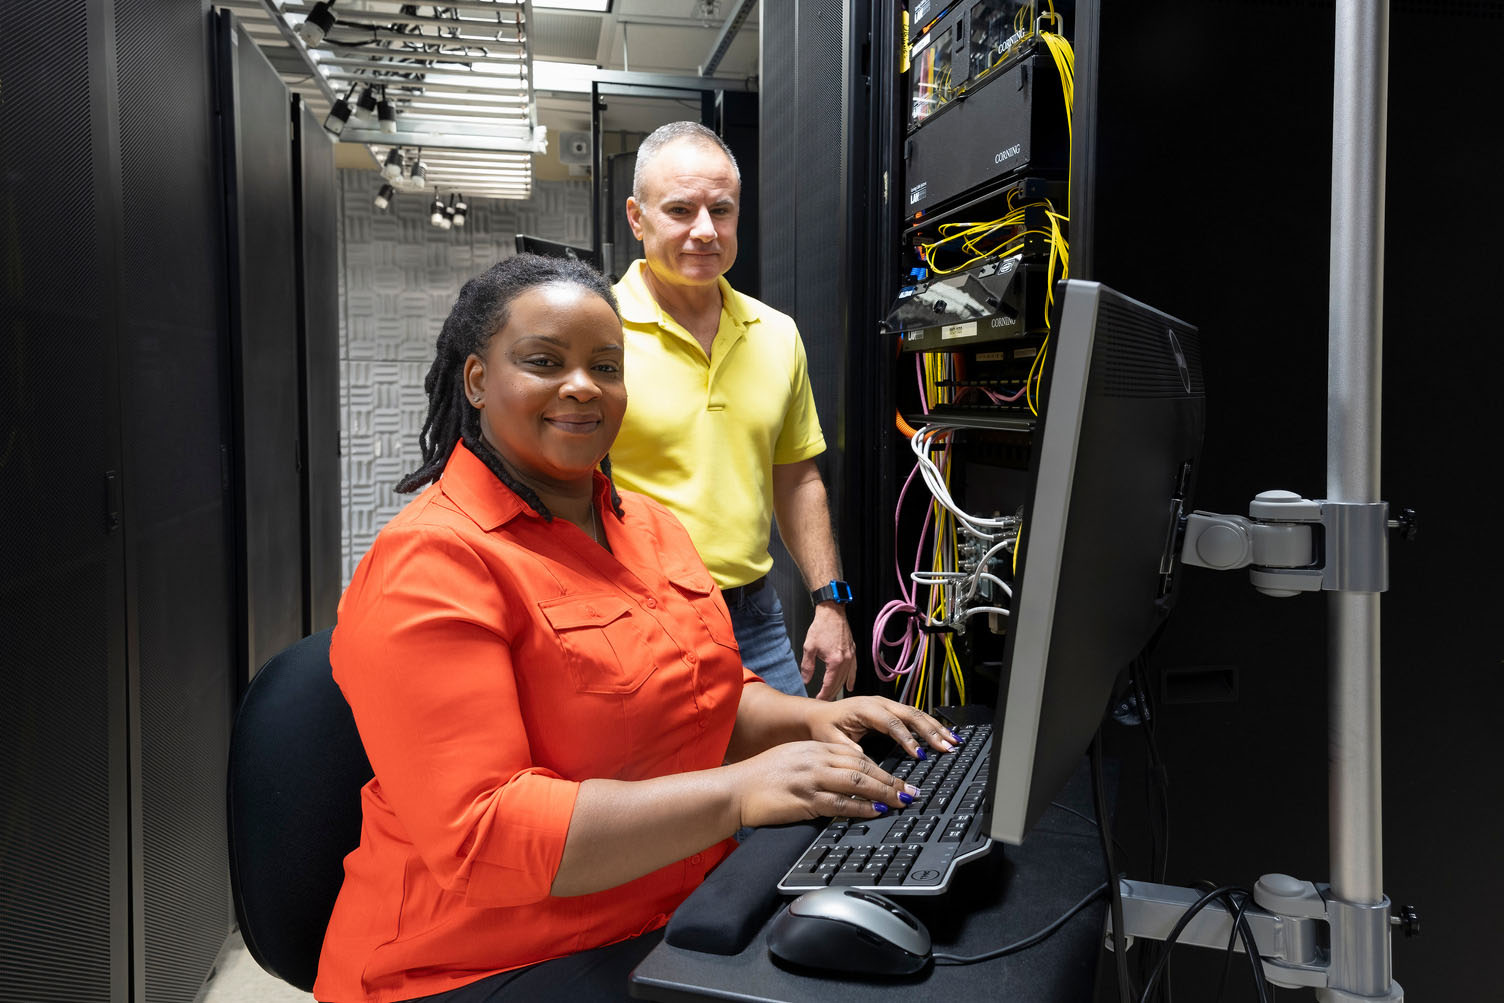 Two male IT experts work together in a server room